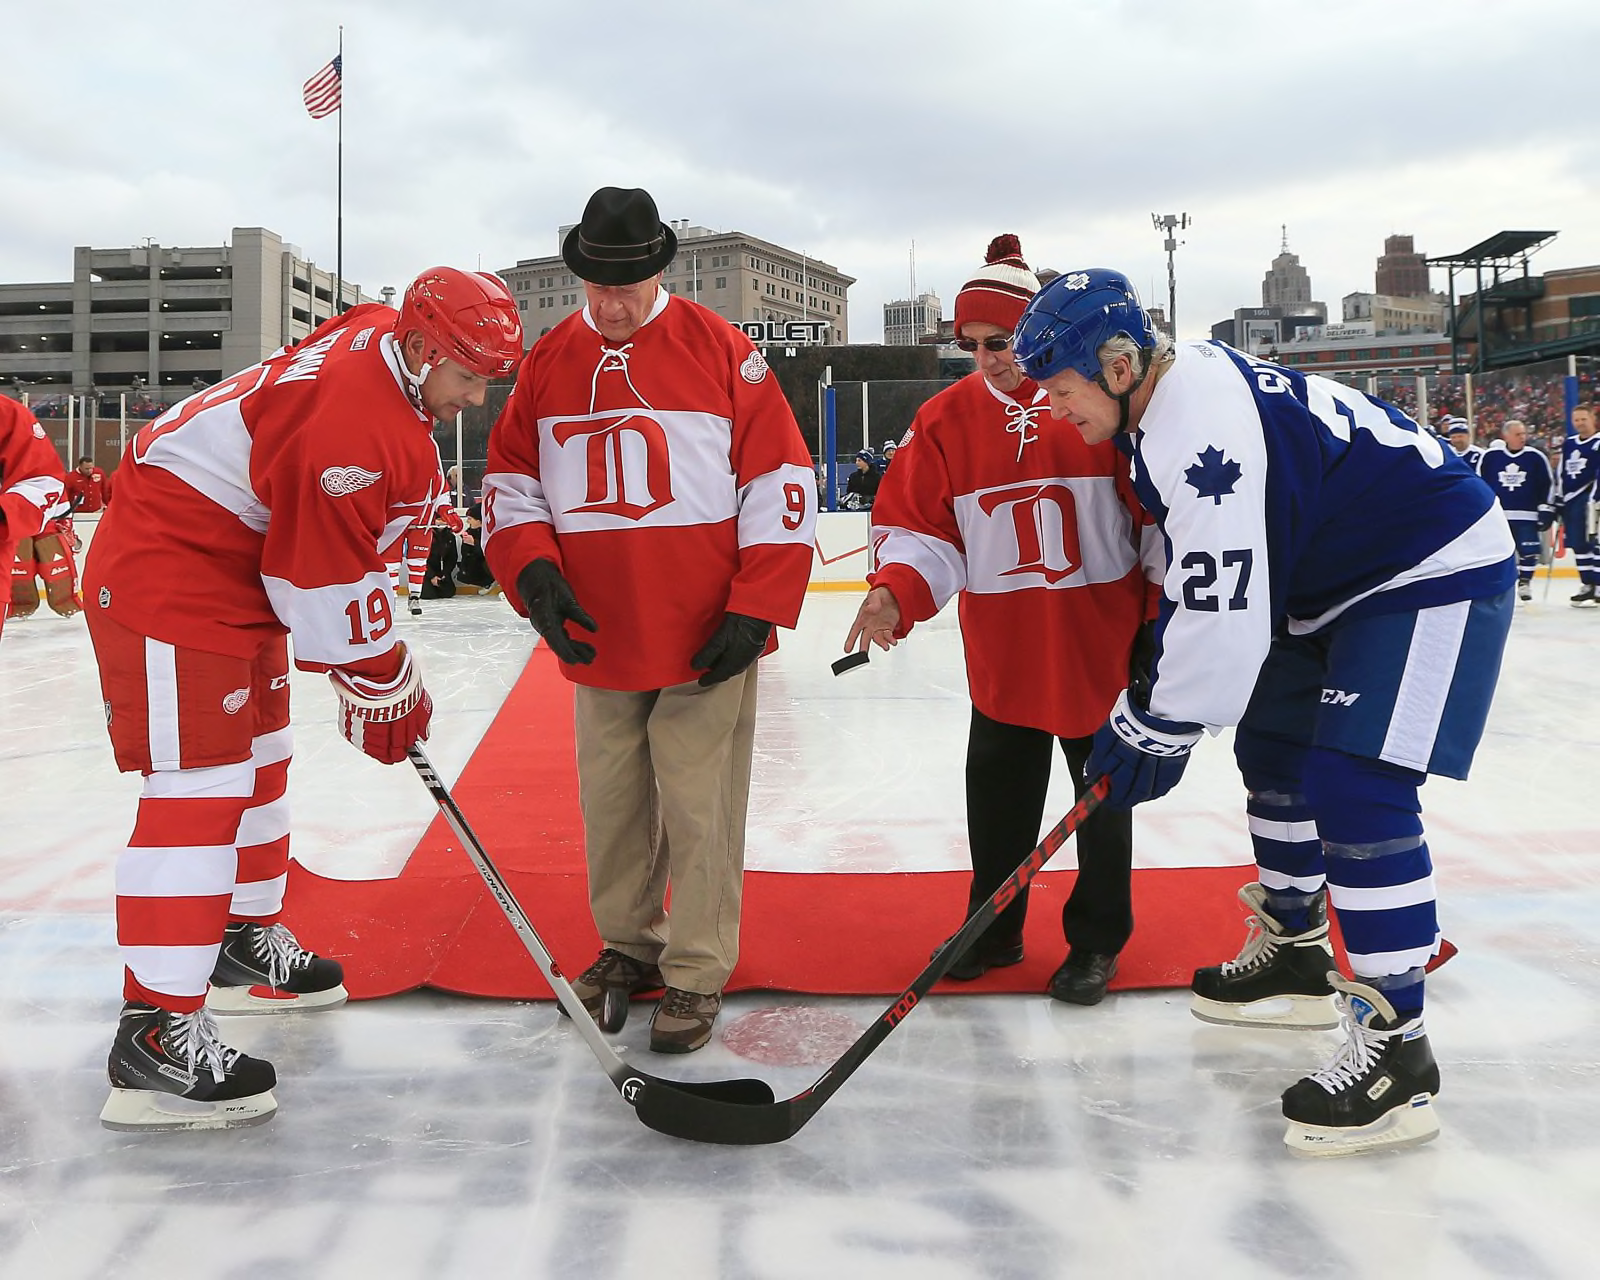 Toronto Maple Leafs: All-Time Starting Line-Up - Page 2